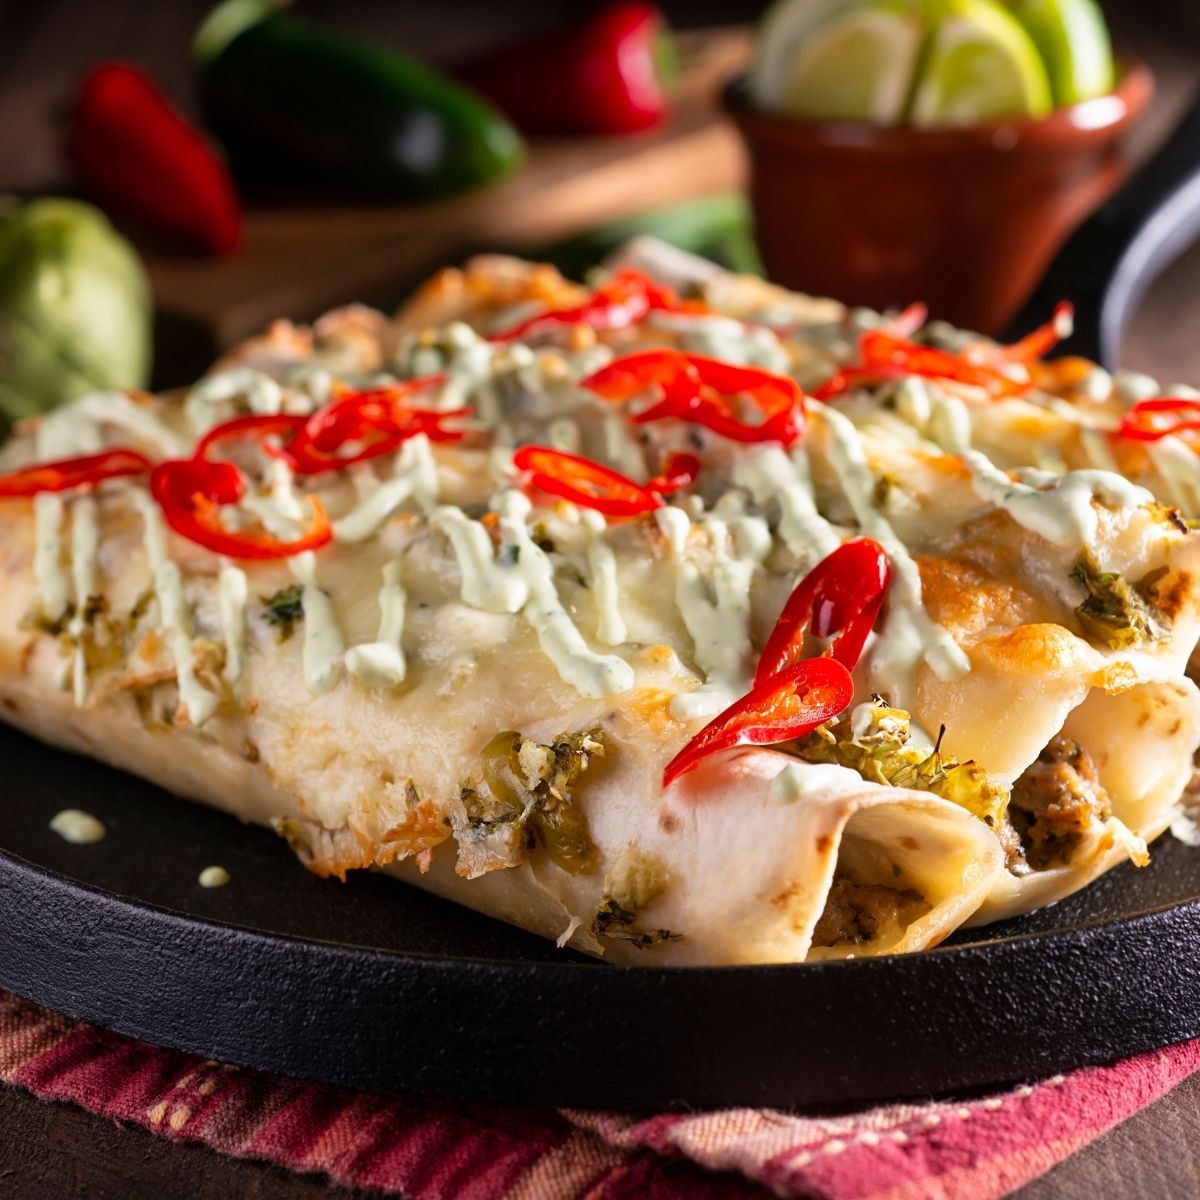 Four Chicken enchiladas in a black baking dish with diced red peppers on top